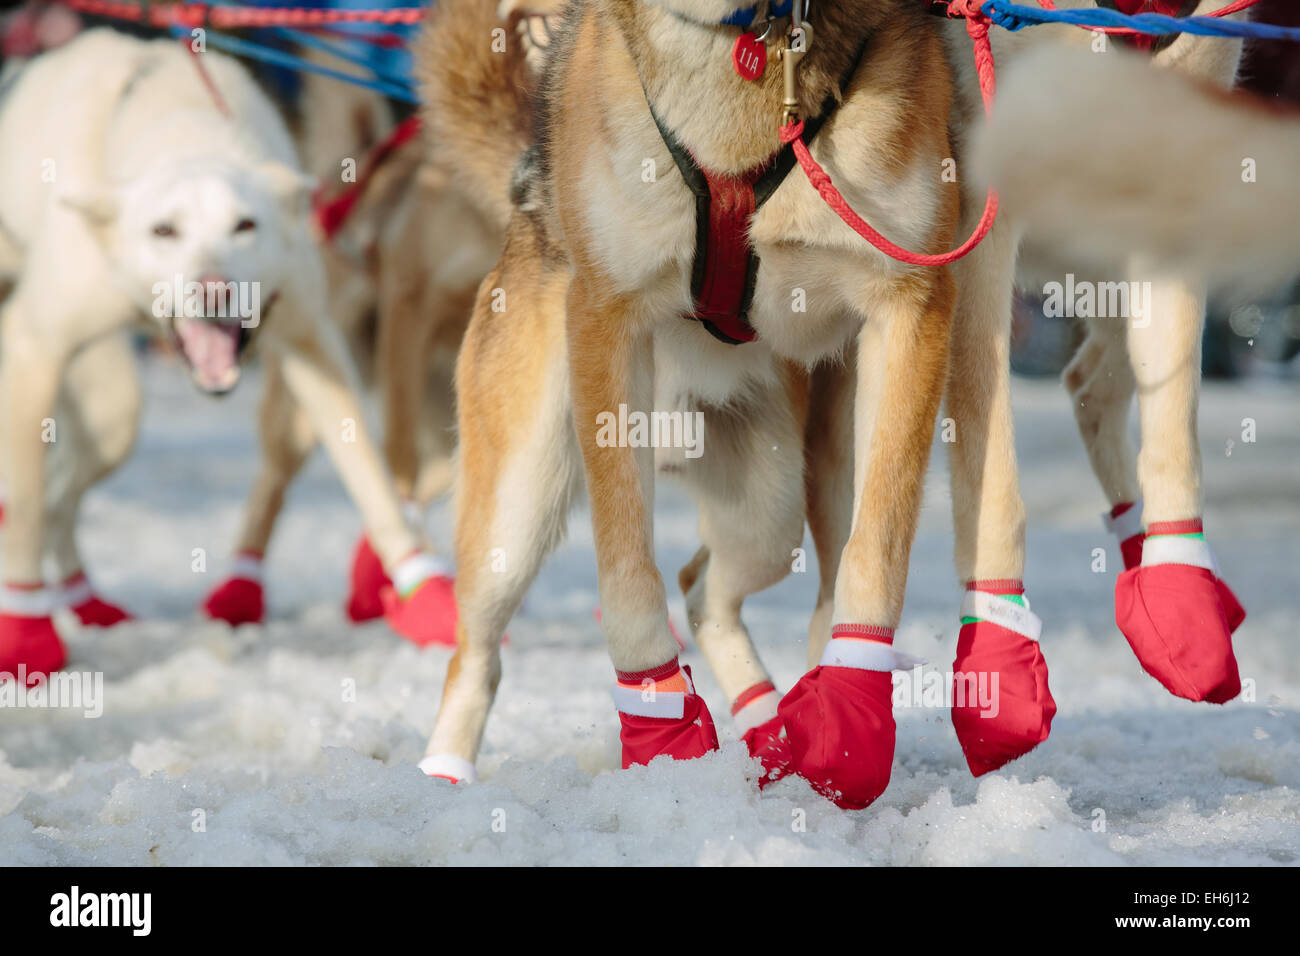 Iditarog sled dogs' paws are protected by fabric dog 'booties' at the Ceremonial start of the 2015 Iditarod sled dog race in Anchorage, Alaska on March 7, 2015. The race will resume with the official start in Fairbanks on March 9. Photo: Joshua Corbett/dpa (zu dpa: Alaska, Land des Hechelns: «Das härteste Schlittenrennen der Welt» vom 08.03.2015) Stock Photo